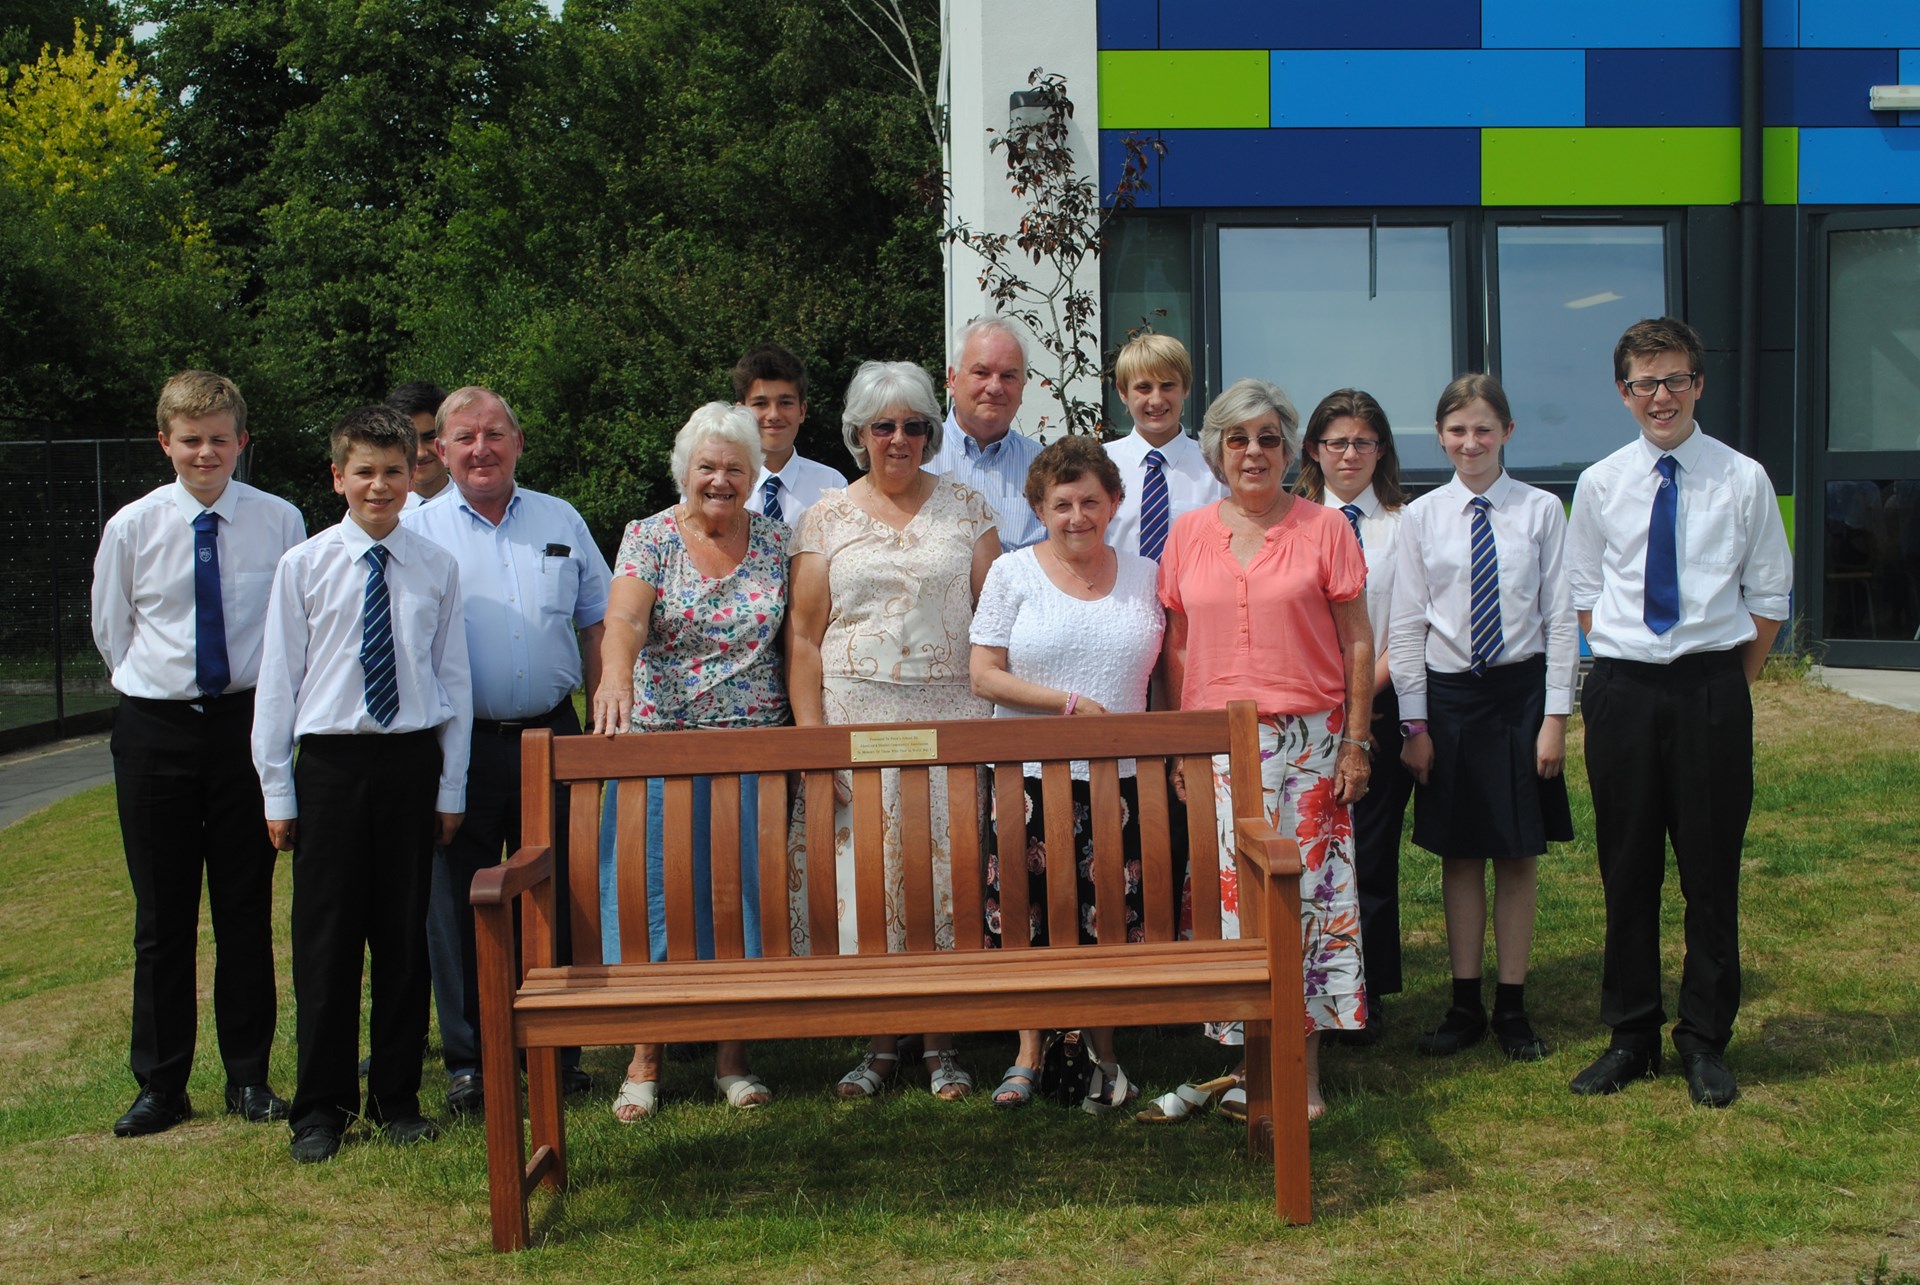 Representatives from the Fundraising Committee present the garden seat to Perins school